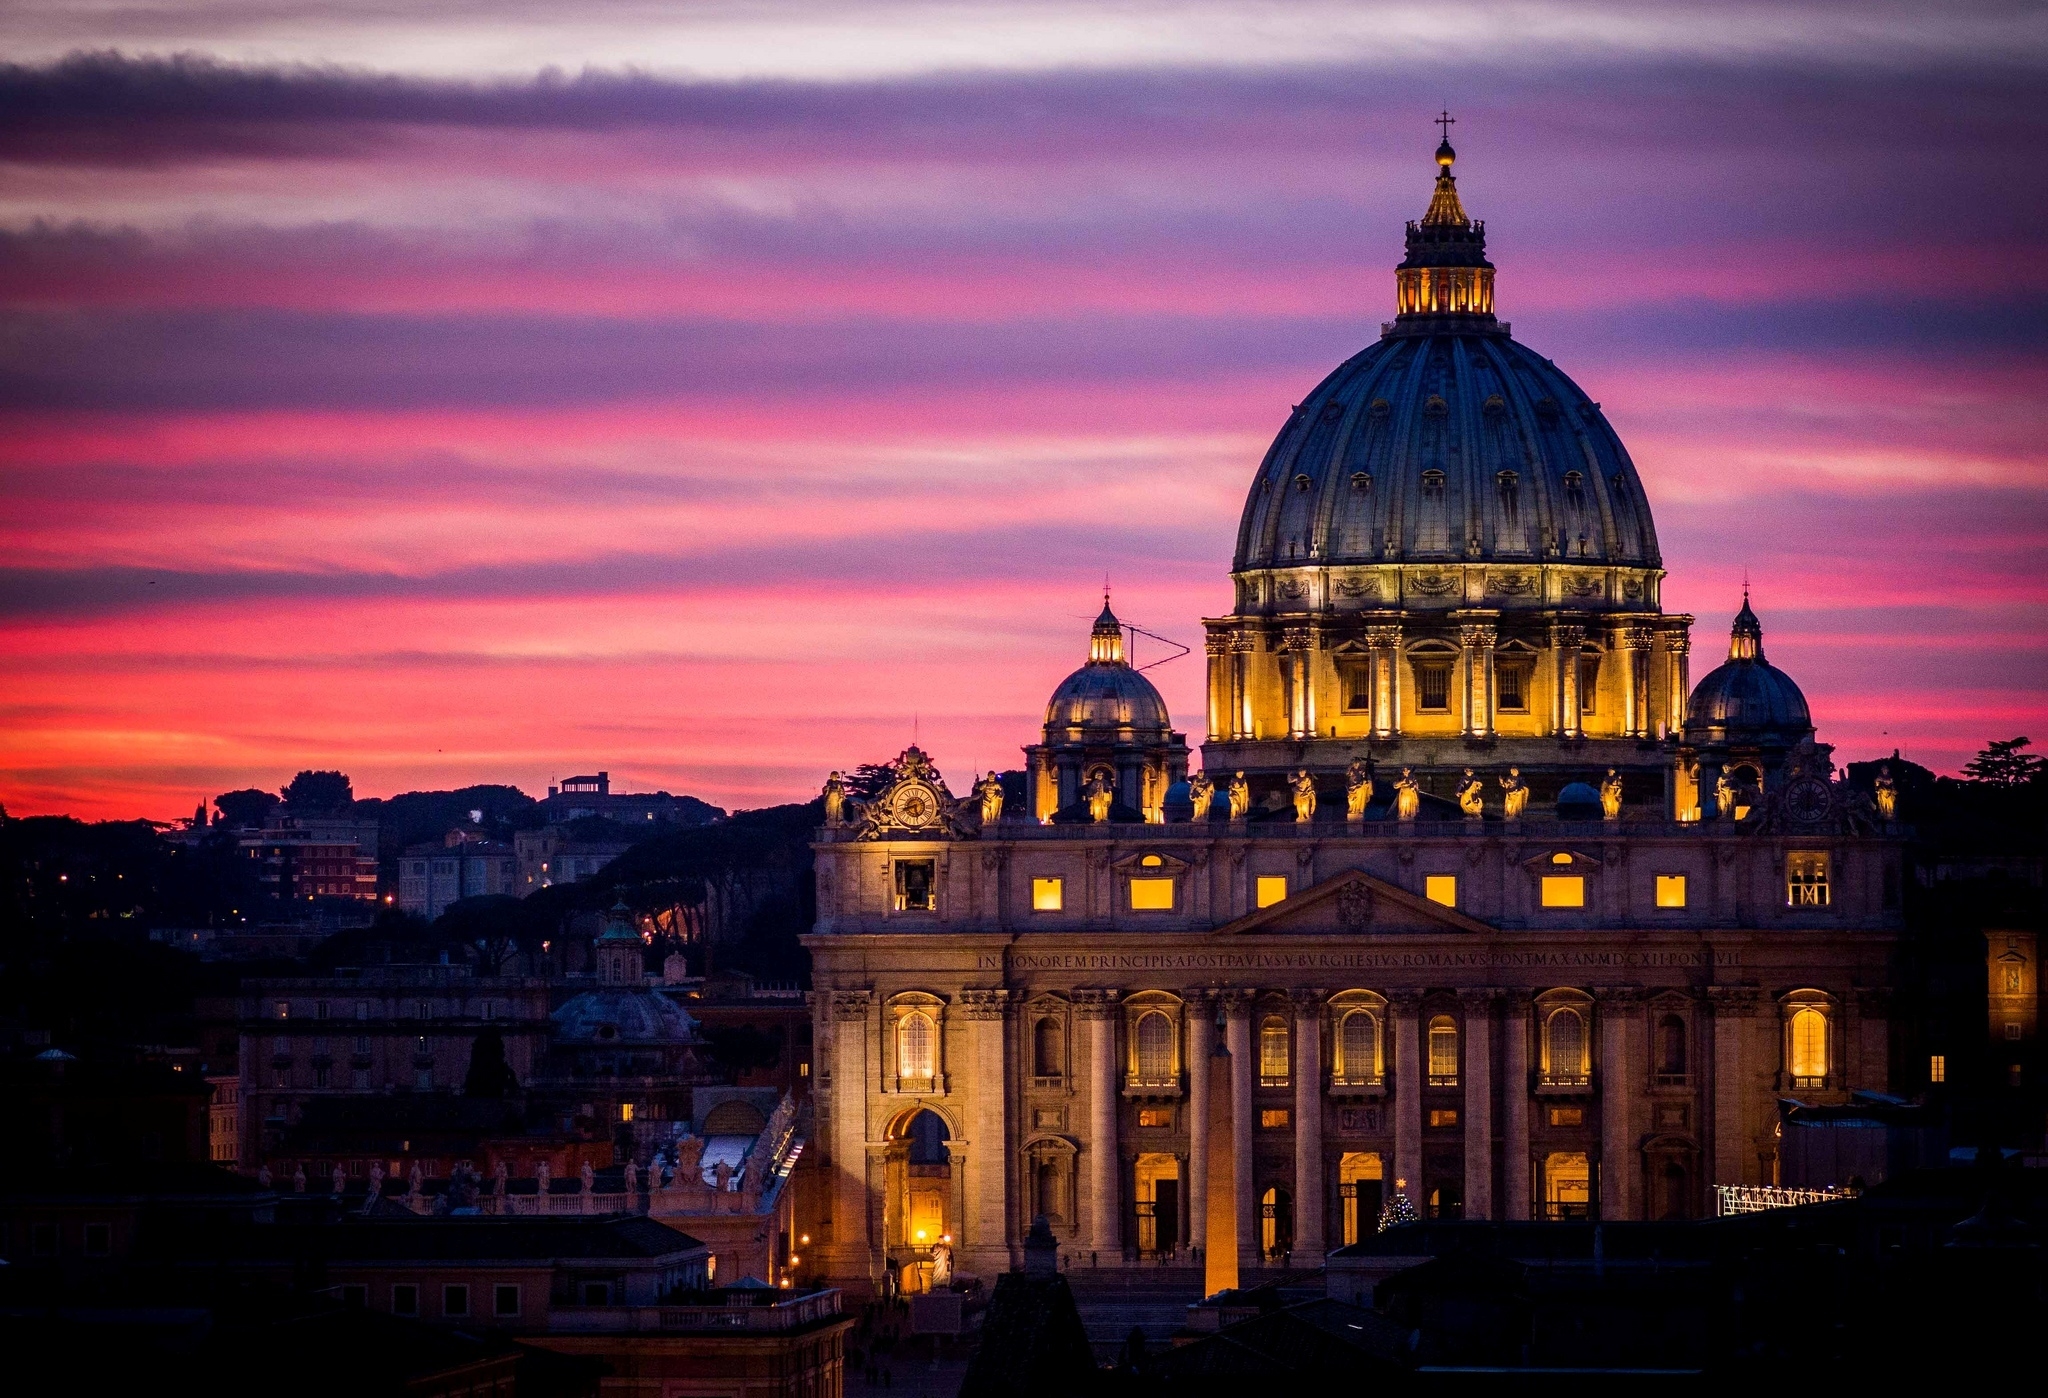 32k Linux st peters basilica, saint paul's cathedral, evening, sunset